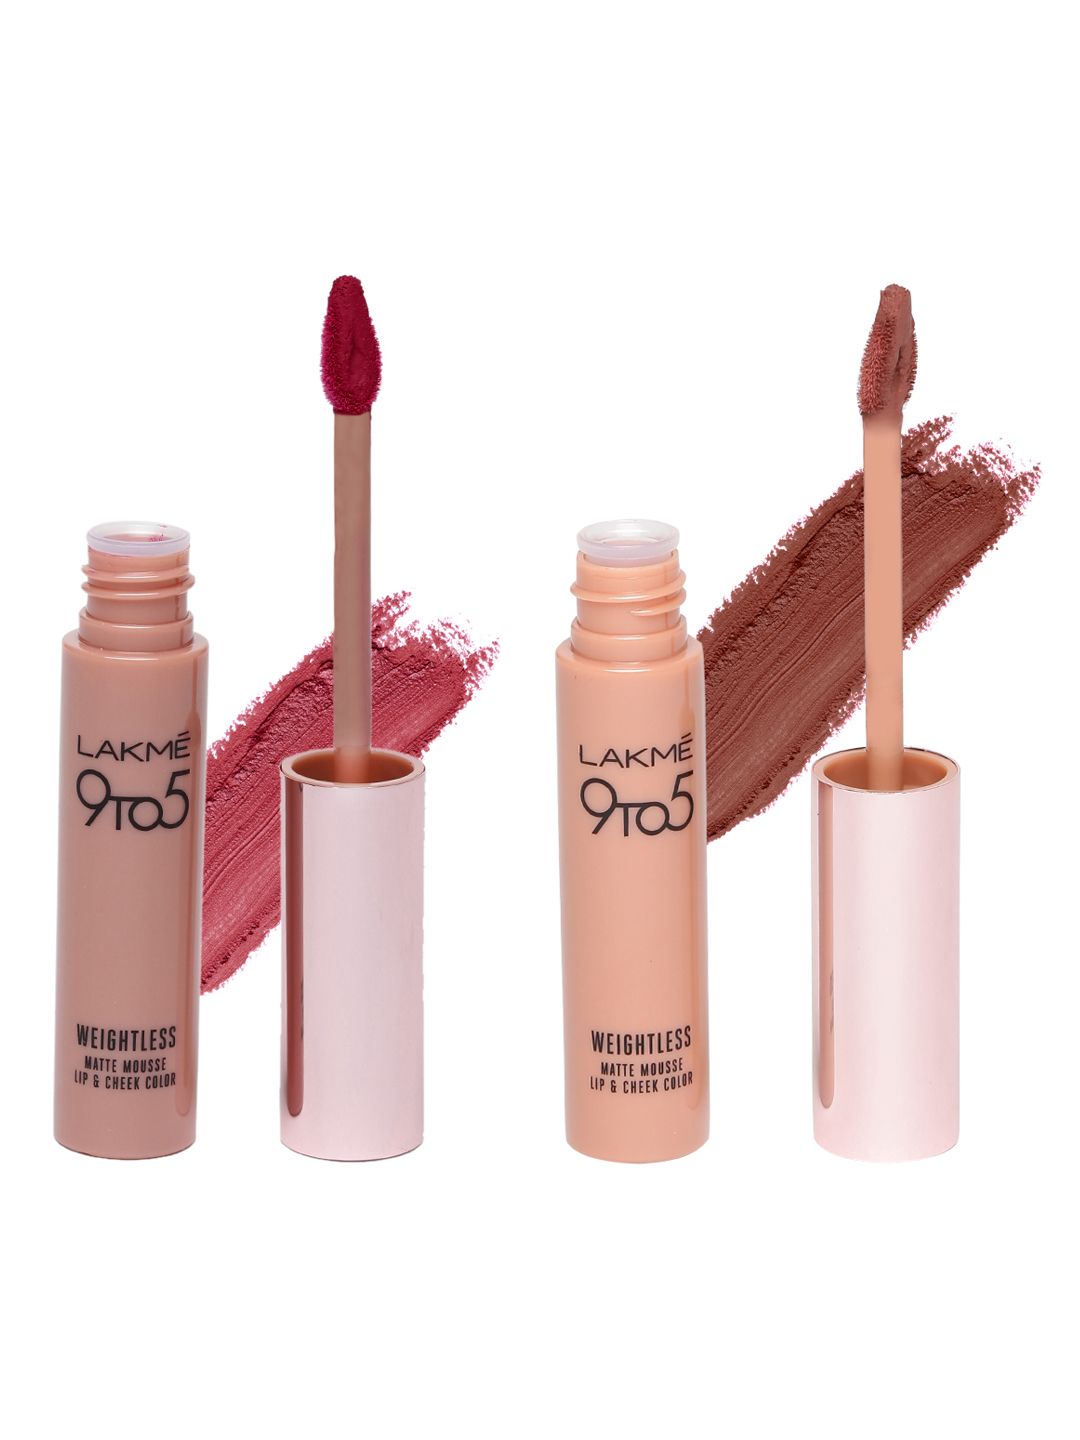 Lakme Plum Feather & Coffee Lite 9to5 Weightless Matte Mousse Lip & Cheek Colors Price in India